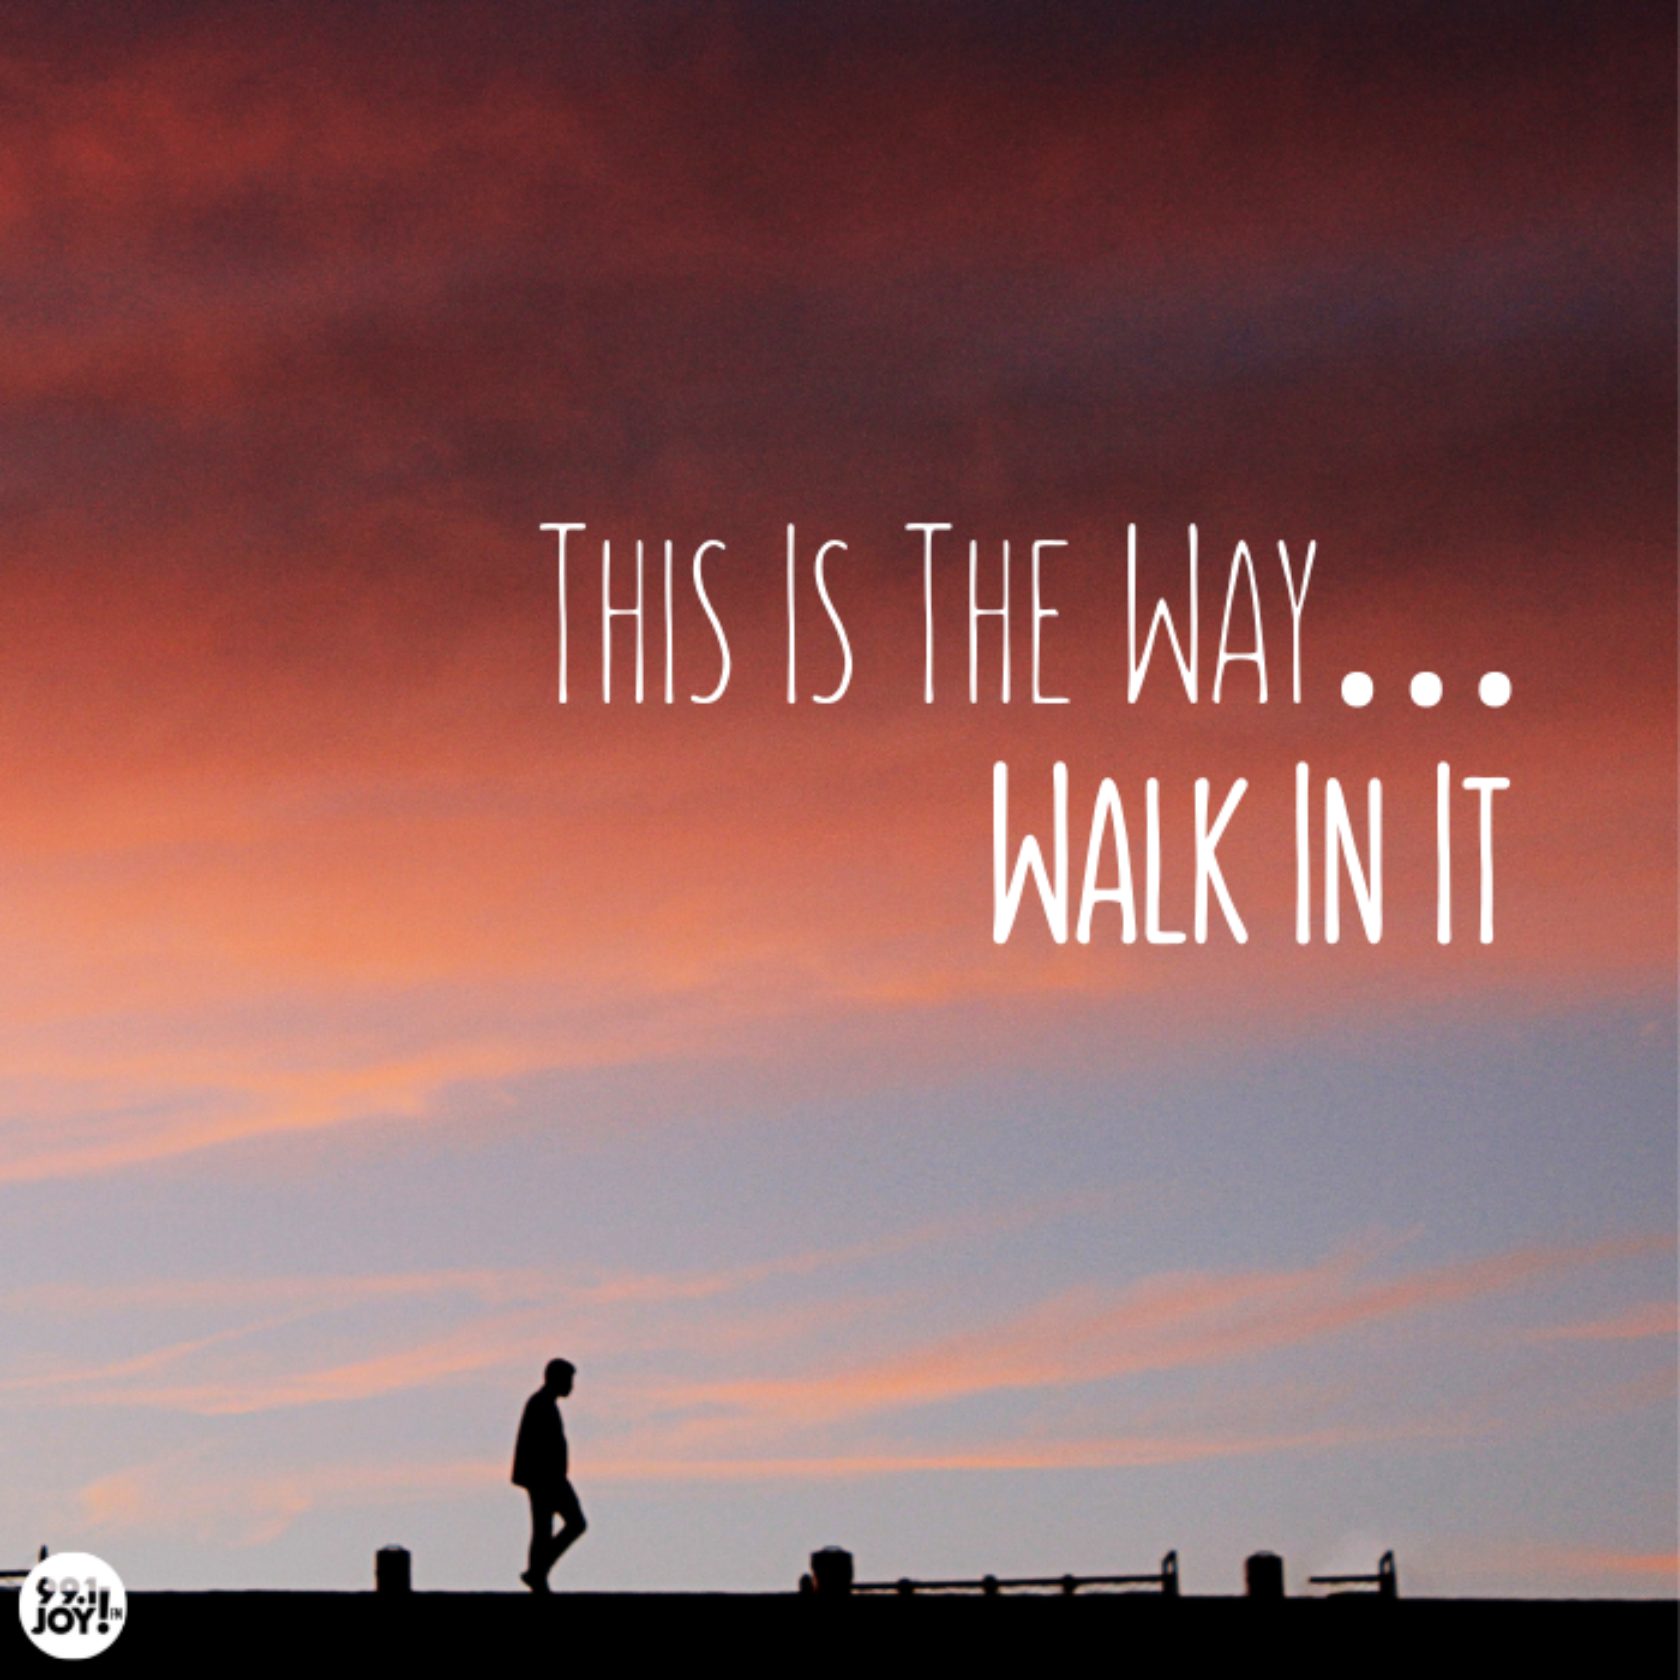 This Is The Way…Walk In It